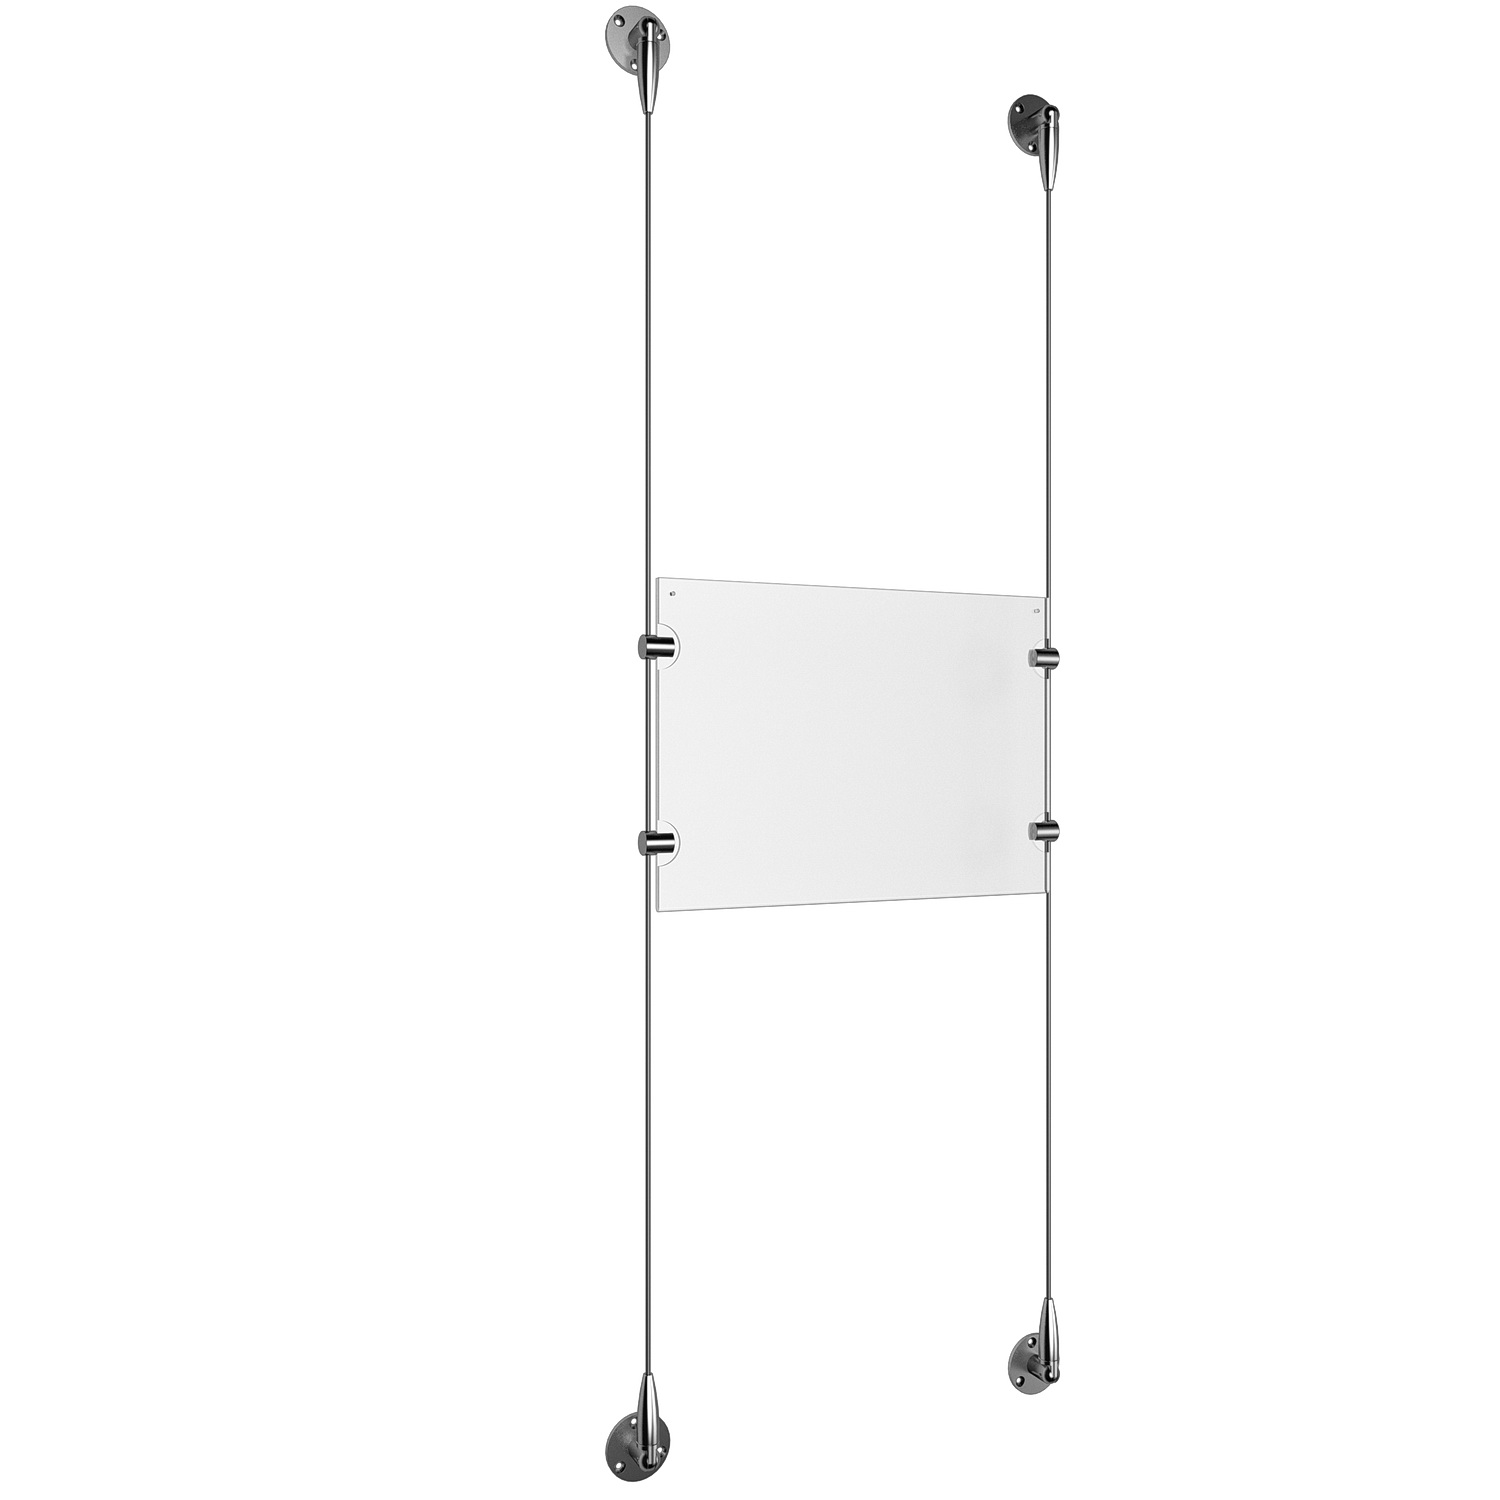 (1) 11'' Width x 8-1/2'' Height Clear Acrylic Frame & (2) Stainless Steel Satin Brushed Adjustable Angle Signature 1/8'' Cable Systems with (4) Single-Sided Panel Grippers